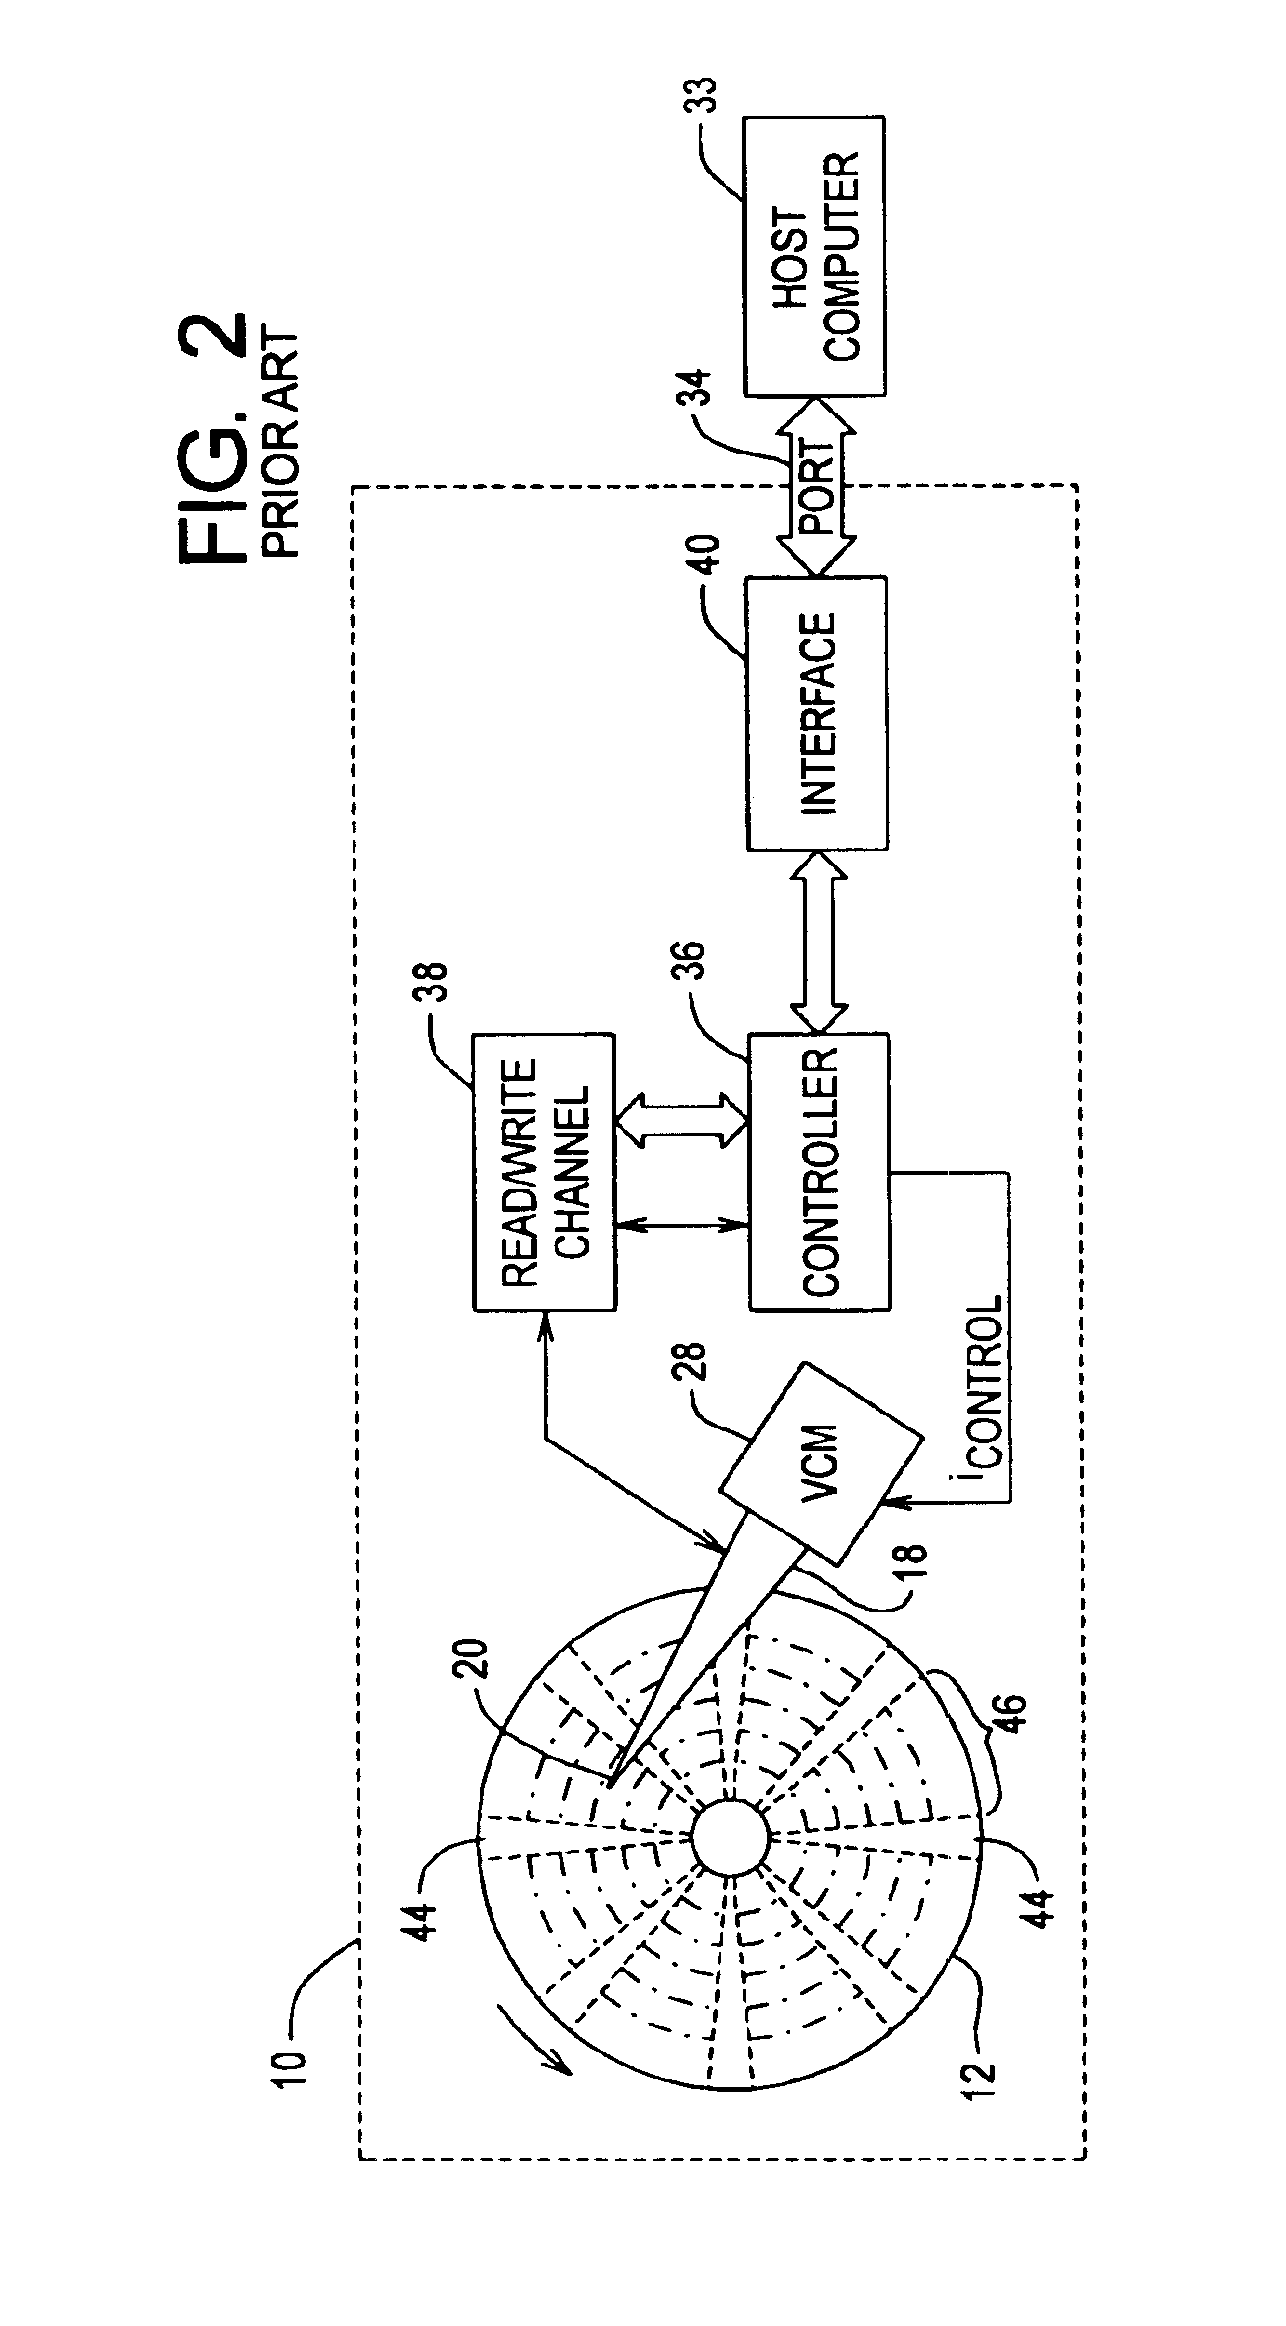 Method and apparatus for determining a transducer's reference position in a disk drive having a disk surface with spiral servo information written thereon